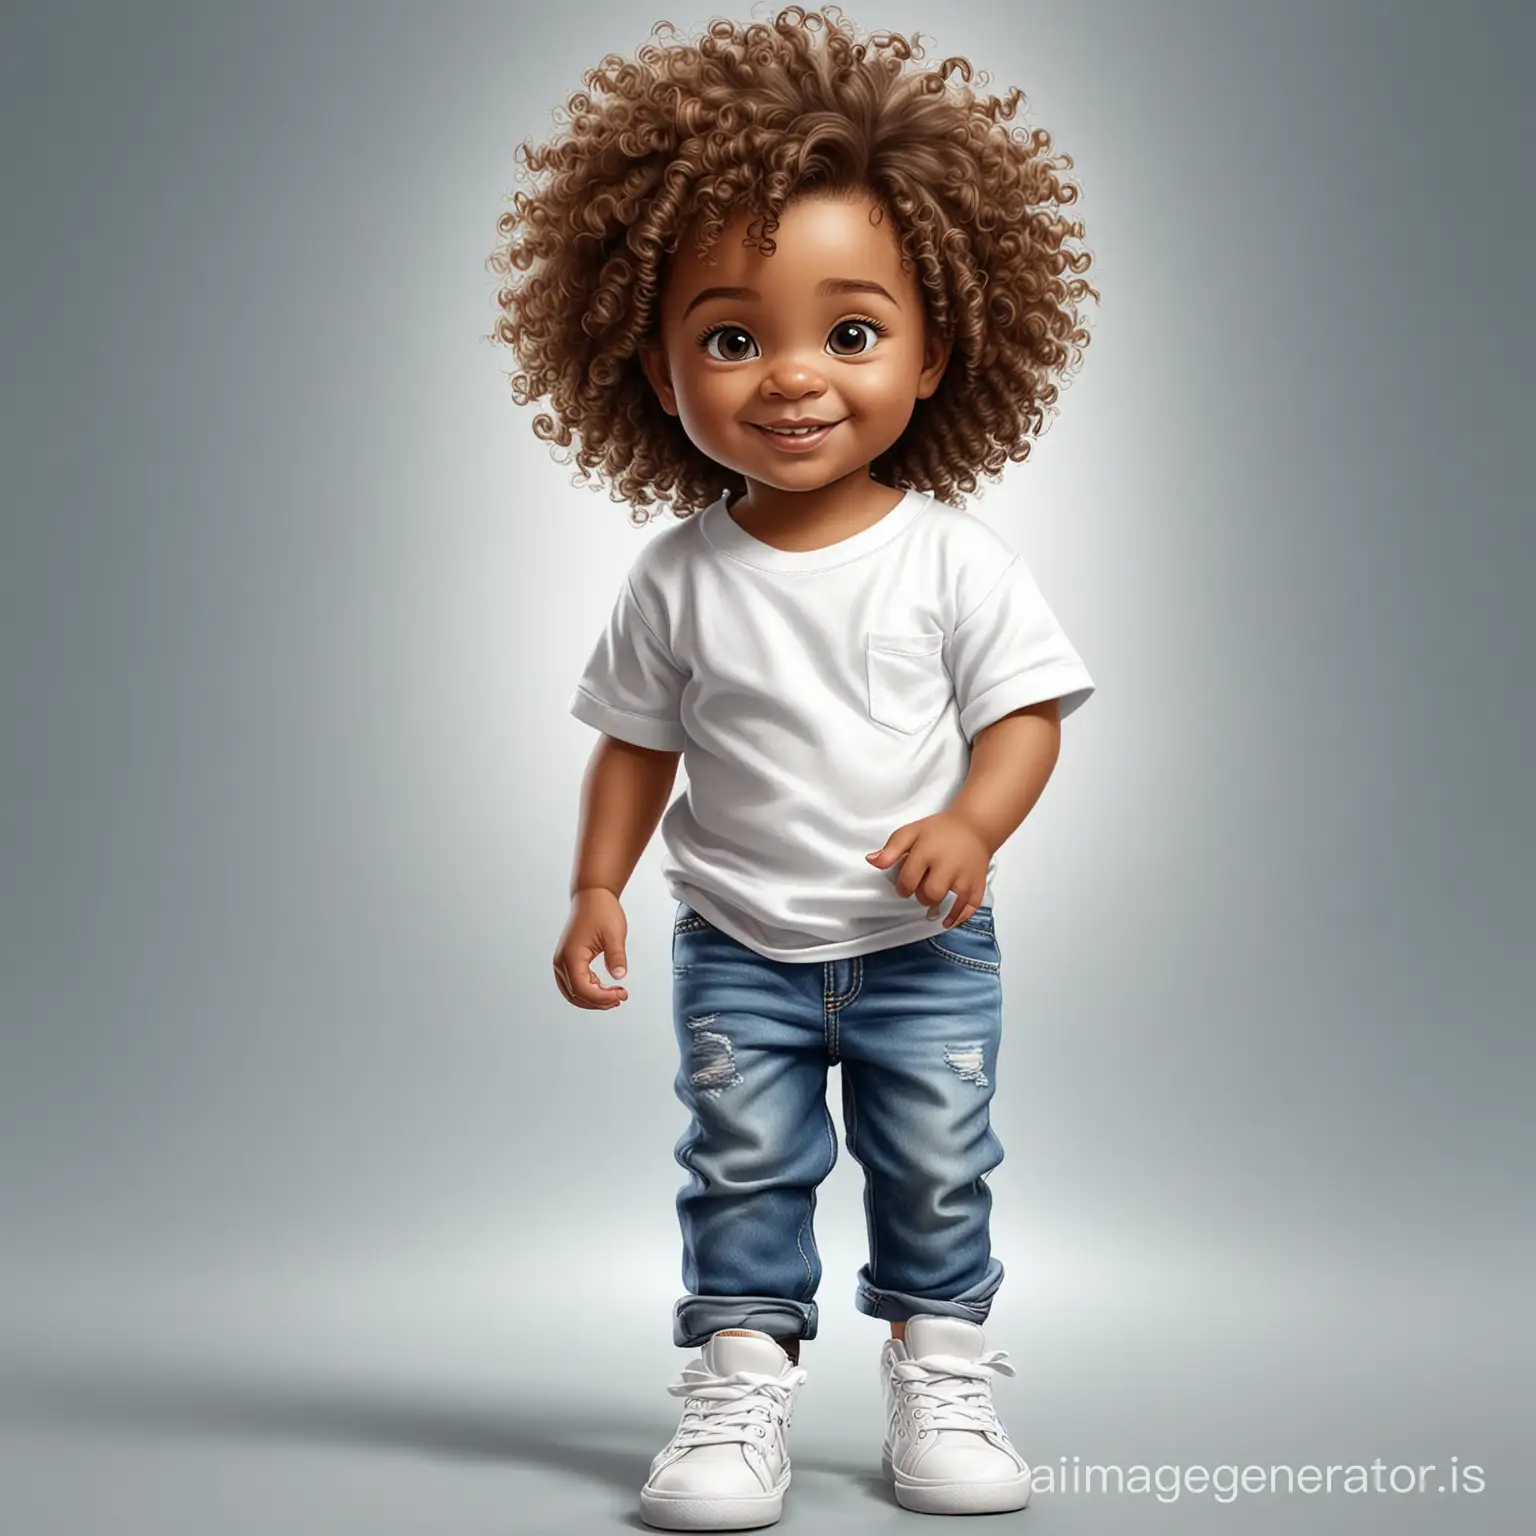 AfricanAmerican-Toddler-with-Curly-Hair-in-Casual-Outfit